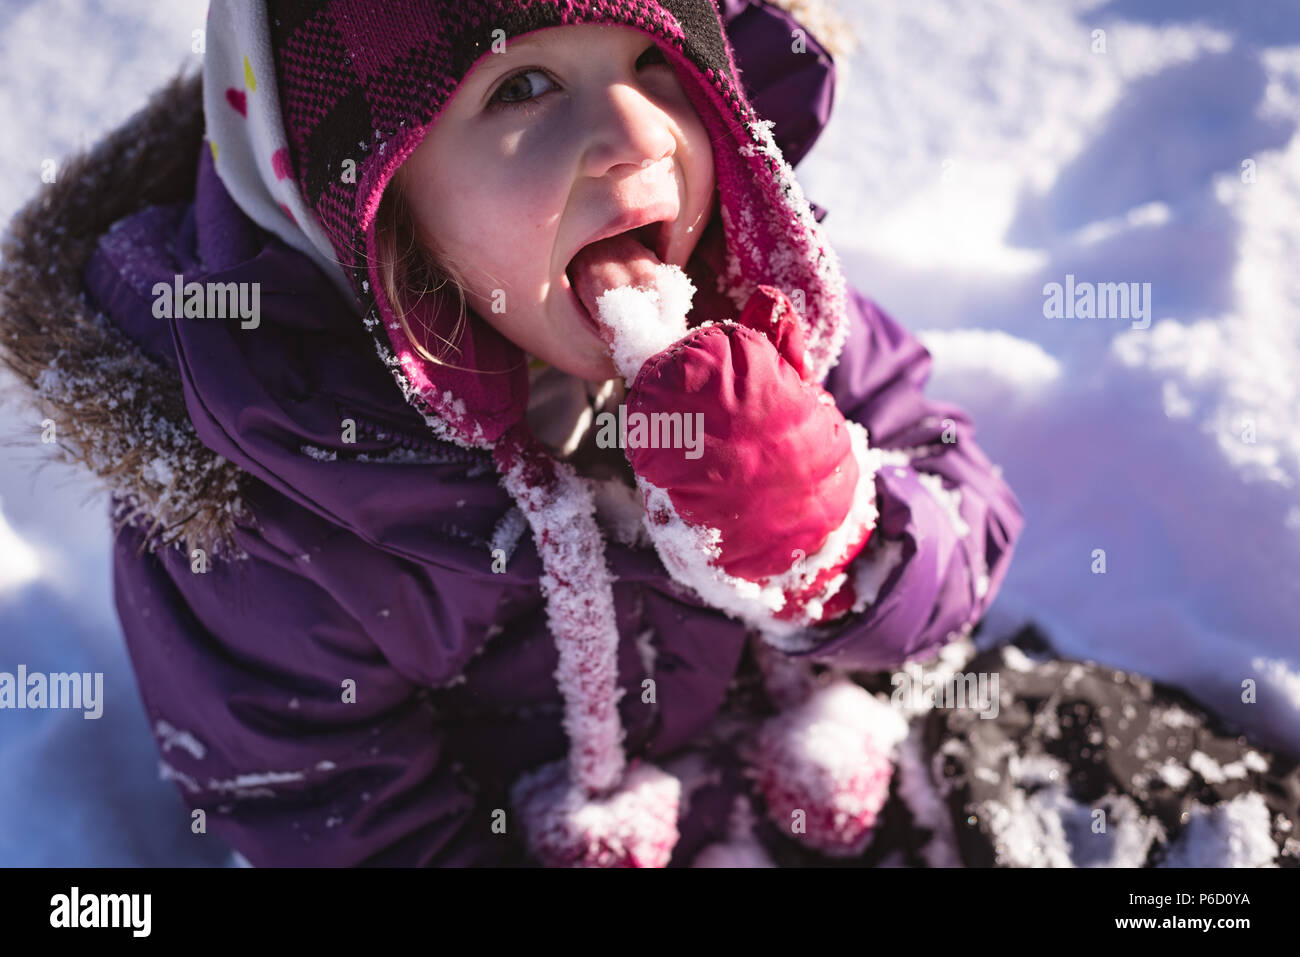 Portrait of cute girl licking snow Stock Photo